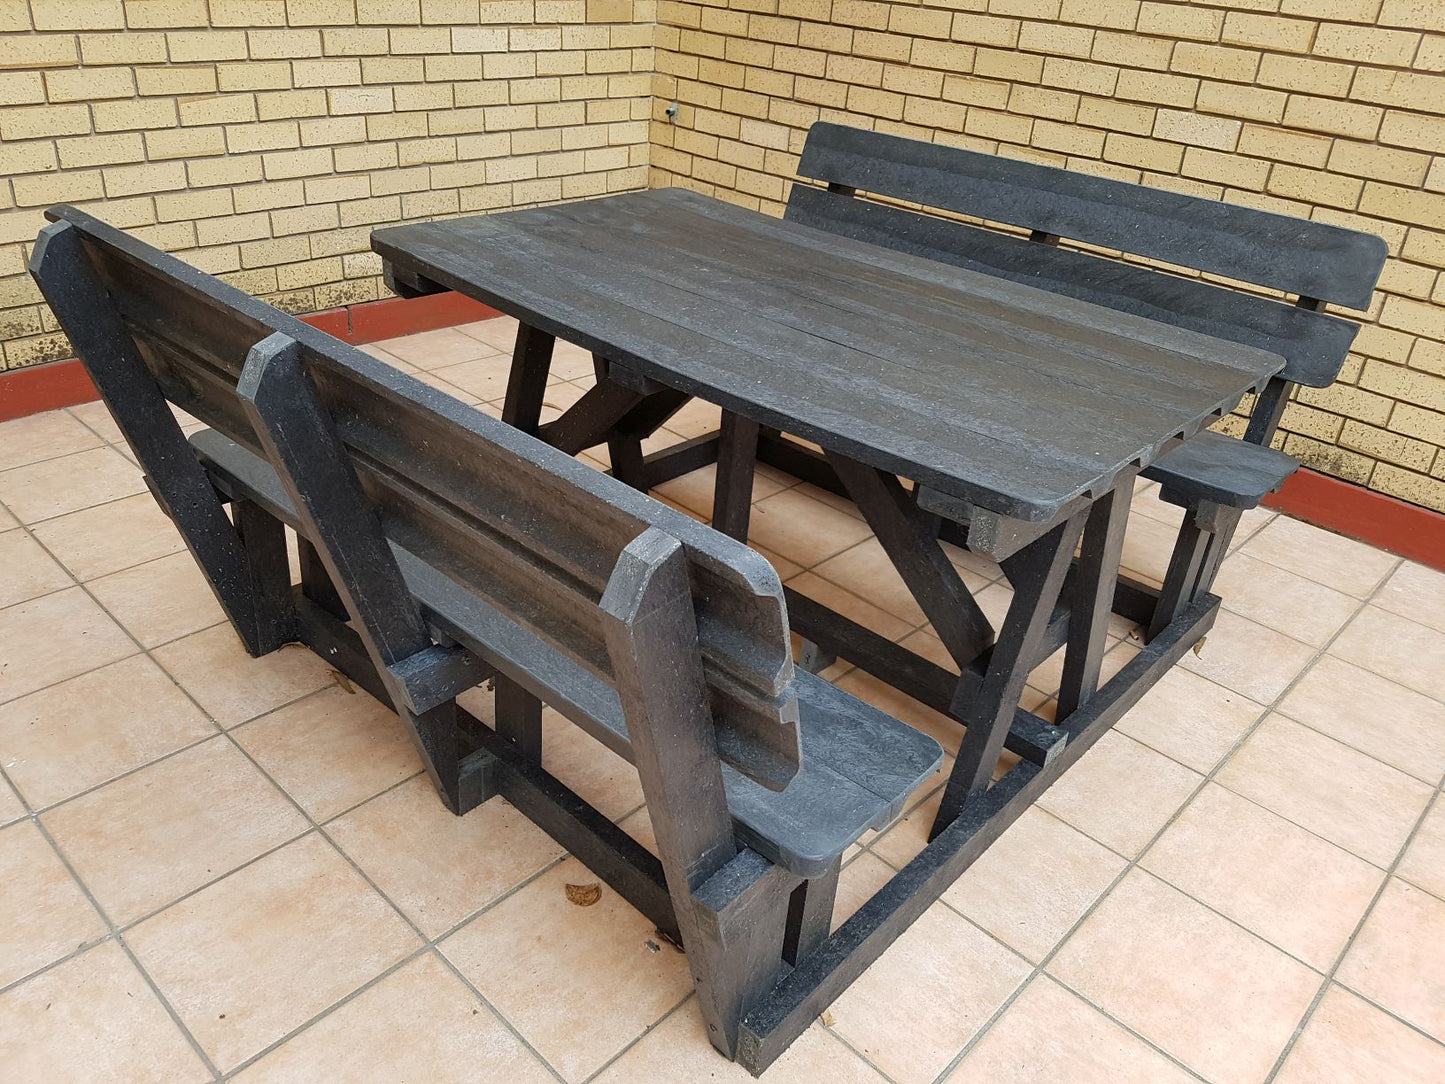 THE RECYCLED PLASTIC "EVEREST" BENCH (EXTRA HEAVY DUTY & WIDER)